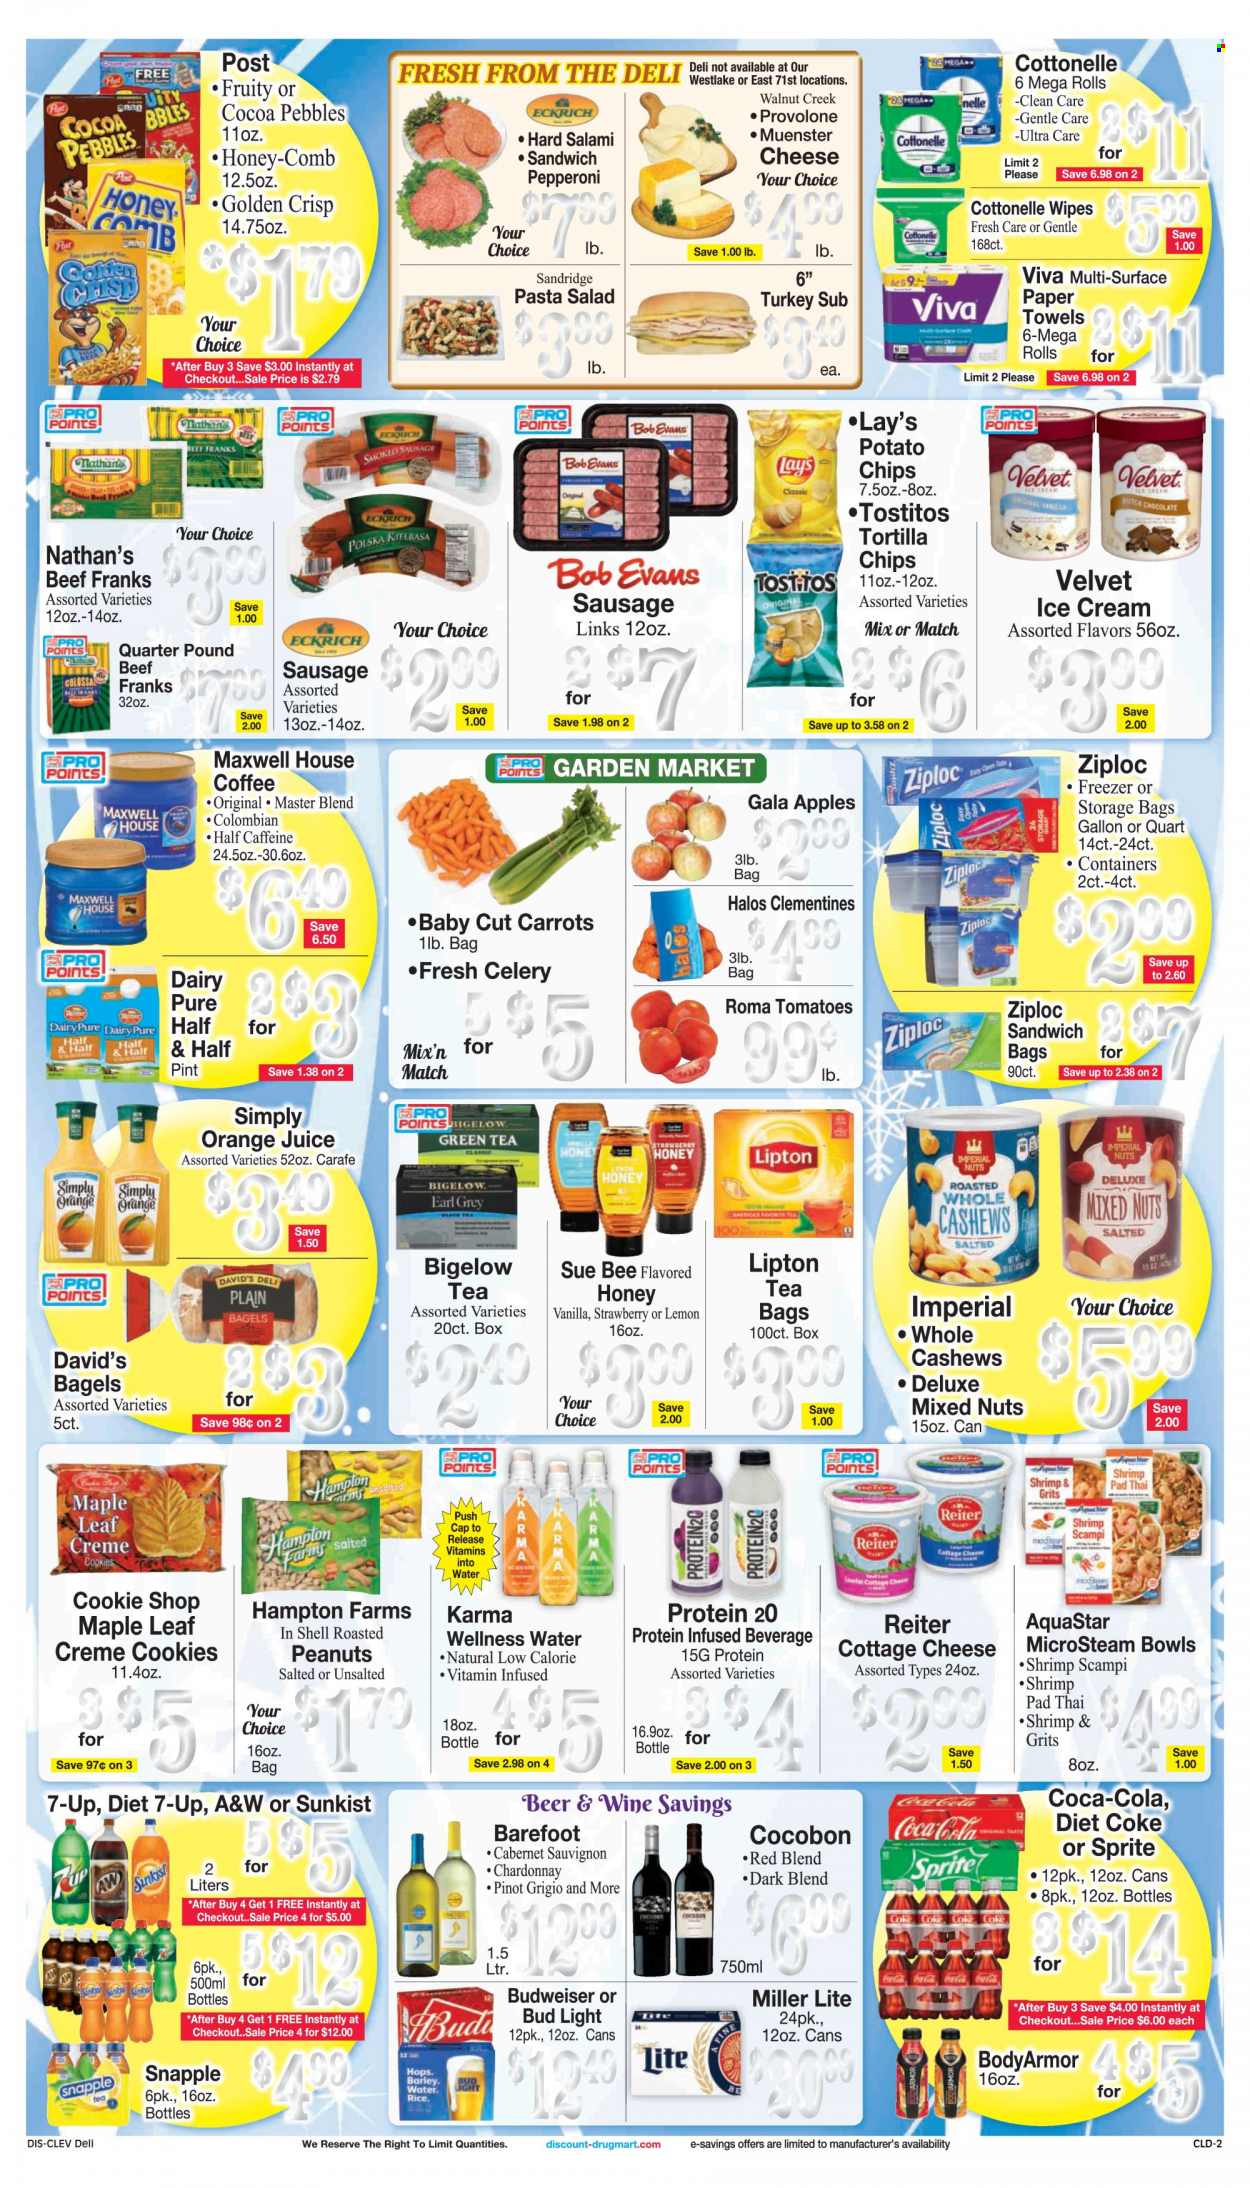 thumbnail - Discount Drug Mart Flyer - 01/12/2022 - 01/18/2022 - Sales products - bagels, tortillas, carrots, celery, tomatoes, salad, apples, Gala, shrimps, pasta, Bob Evans, salami, smoked sausage, pepperoni, kielbasa, pasta salad, cottage cheese, cheese, Münster cheese, Provolone, ice cream, cookies, chips, Lay’s, Tostitos, grits, honey, cashews, roasted peanuts, peanuts, mixed nuts, Coca-Cola, Sprite, orange juice, juice, Lipton, Diet Coke, 7UP, Snapple, A&W, green tea, Maxwell House, tea, coffee, Cabernet Sauvignon, red wine, white wine, Chardonnay, wine, Pinot Grigio, beer, Bud Light, wipes, Cottonelle, comb, Ziploc, storage bag, bijzettafel, towel, Budweiser, clementines, Miller Lite, Half and half. Page 2.